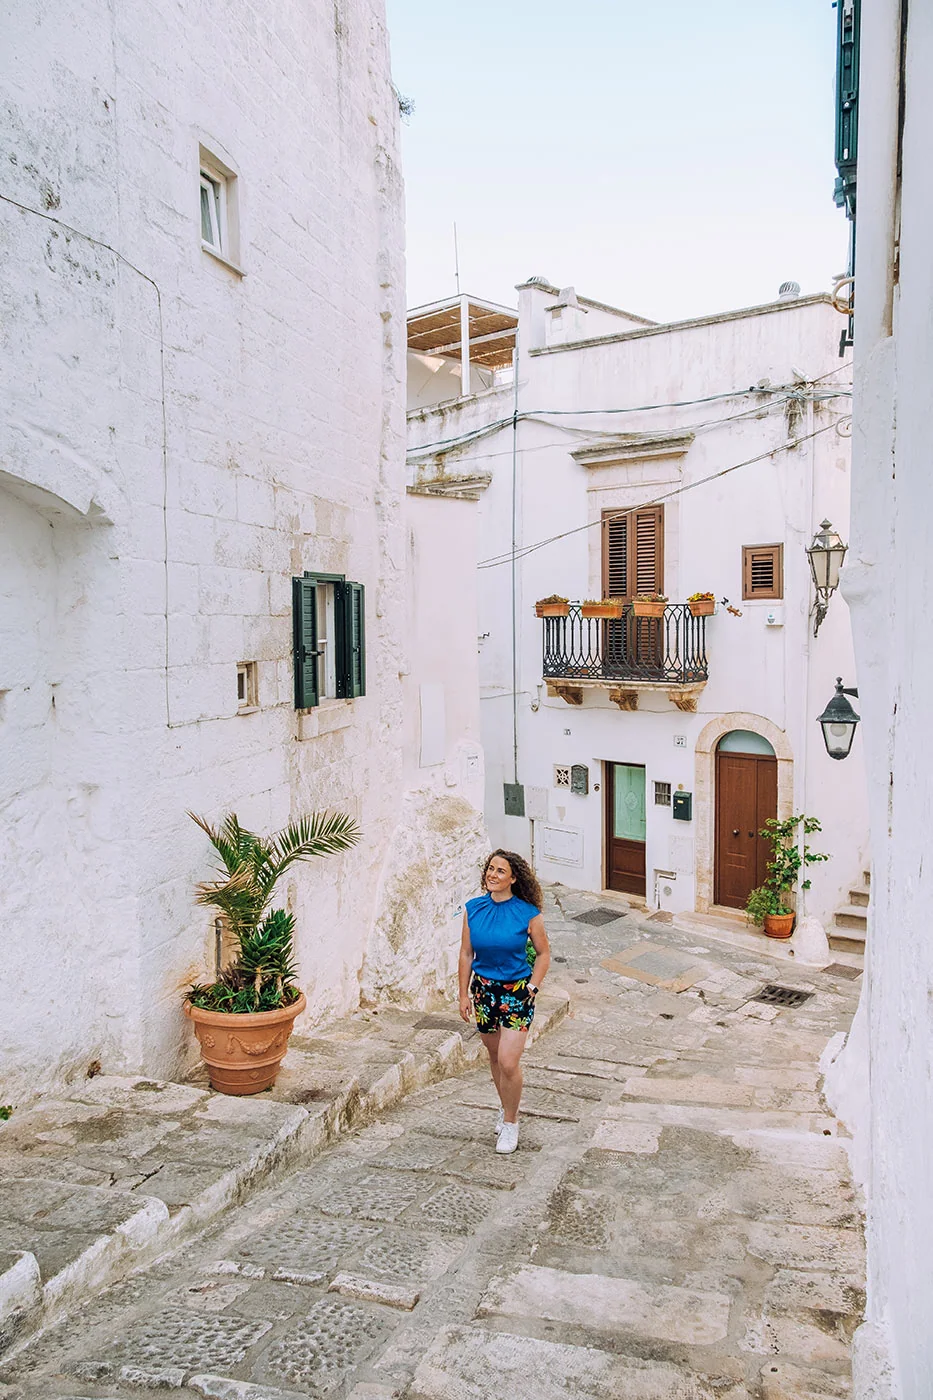 Things to do in Ostuni - Michele walking up staircase